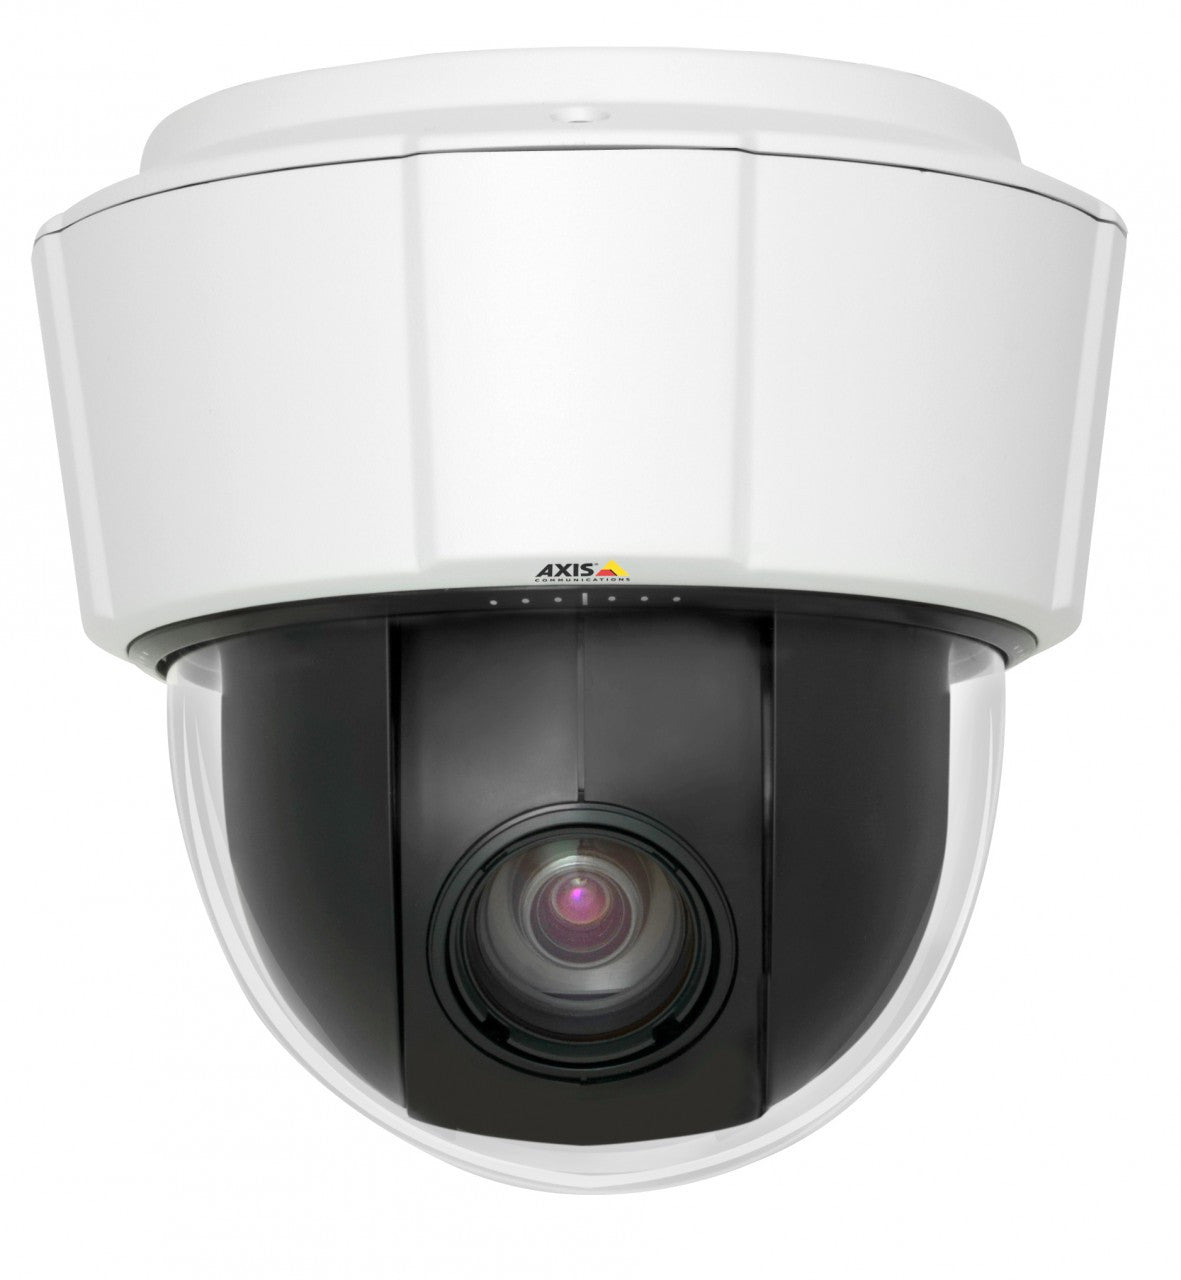 AXIS P5534 (0314-004) PTZ Dome Network Camera